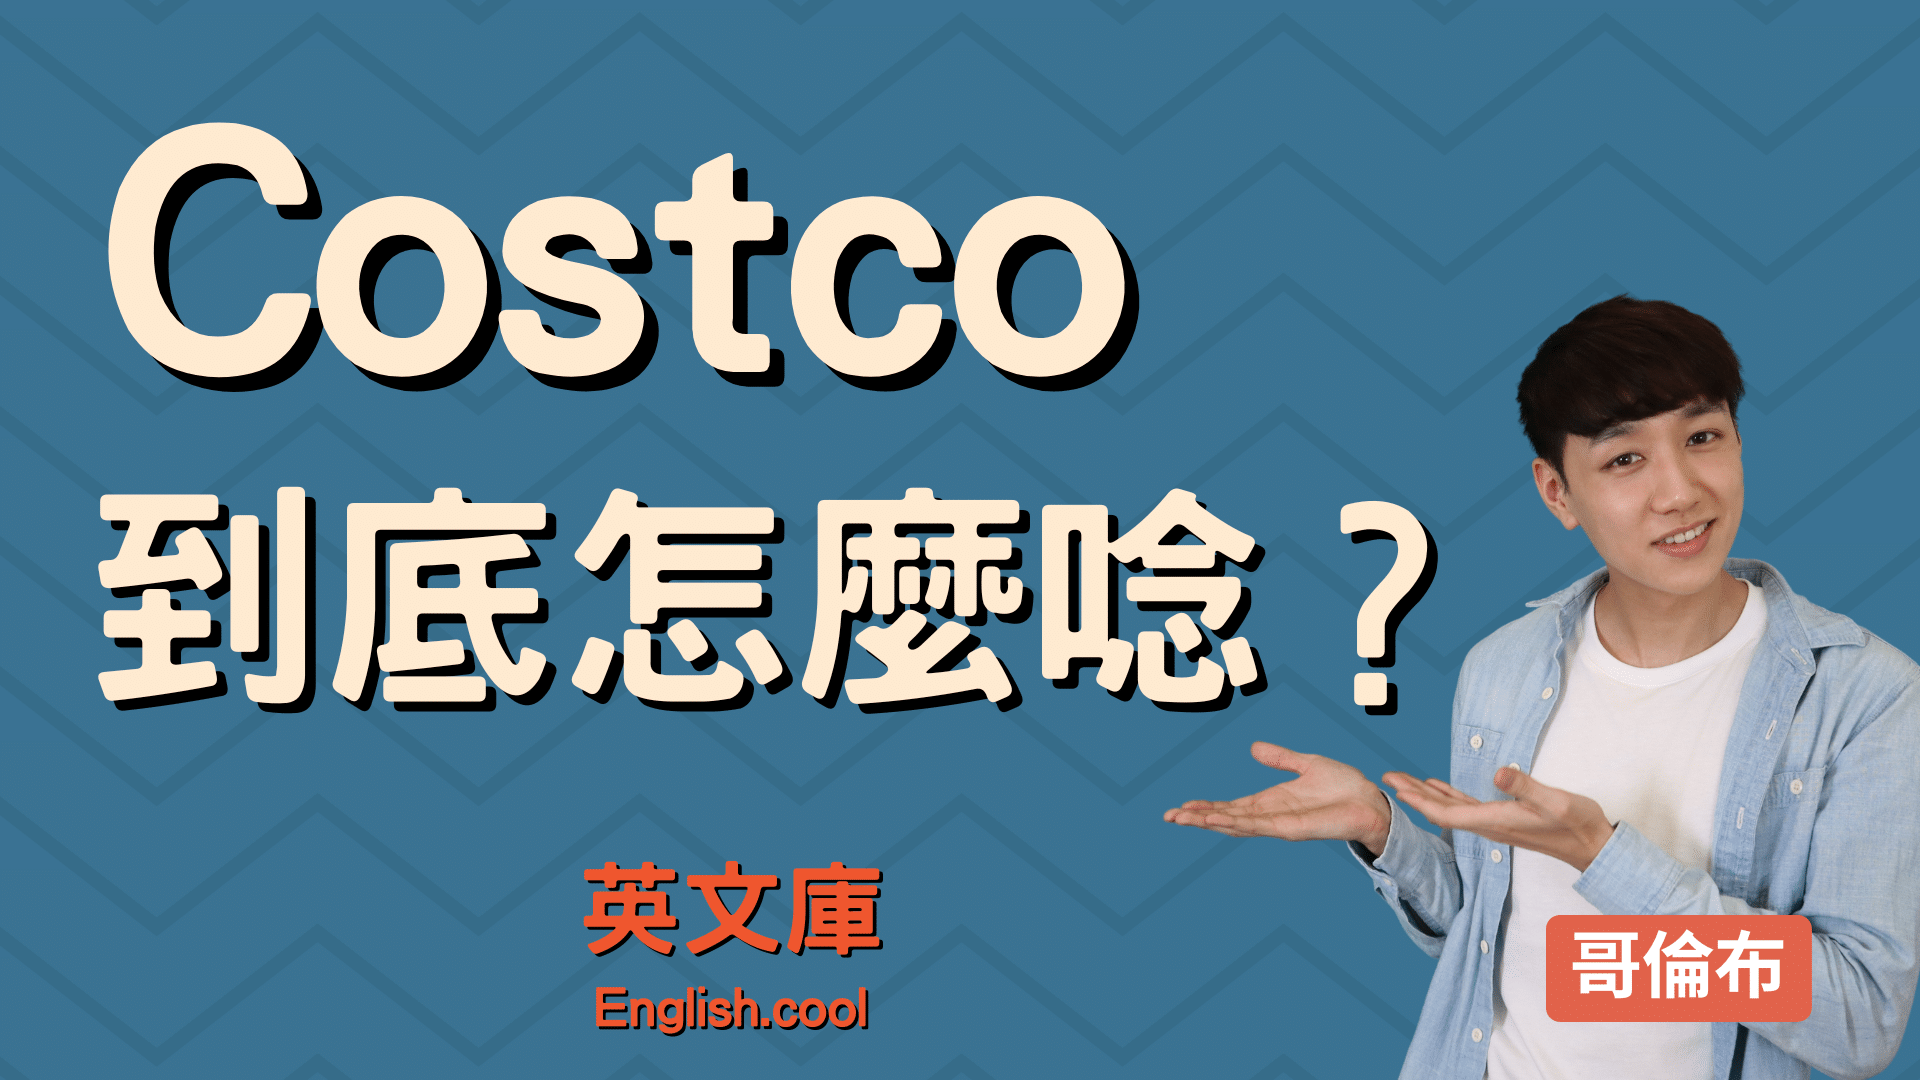 You are currently viewing 【哥倫布發音庫】Costco 好市多的英文怎麼唸？